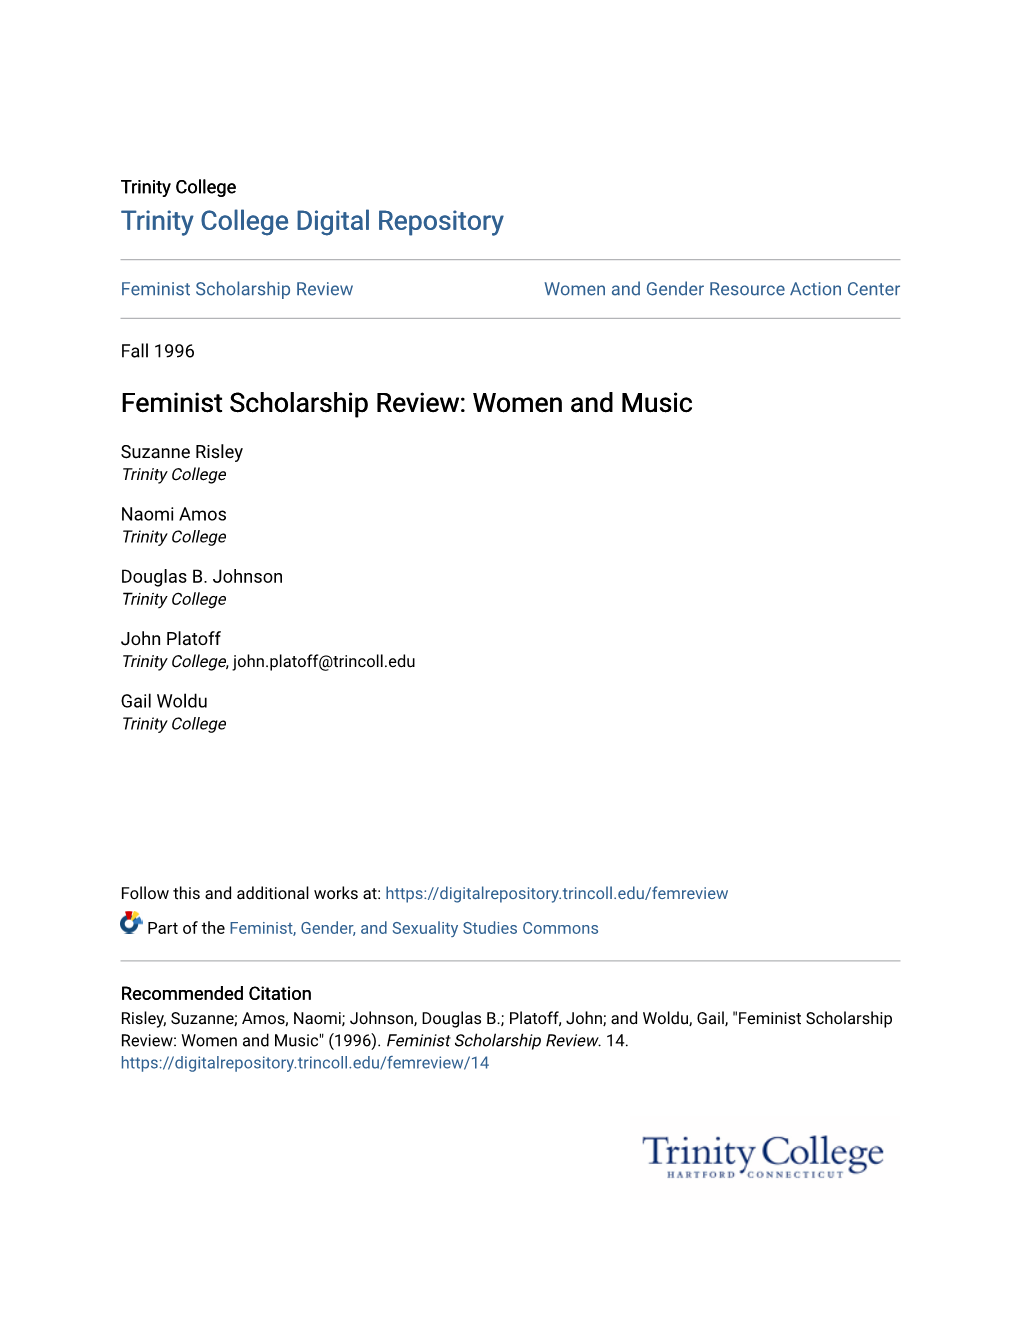 Feminist Scholarship Review: Women and Music